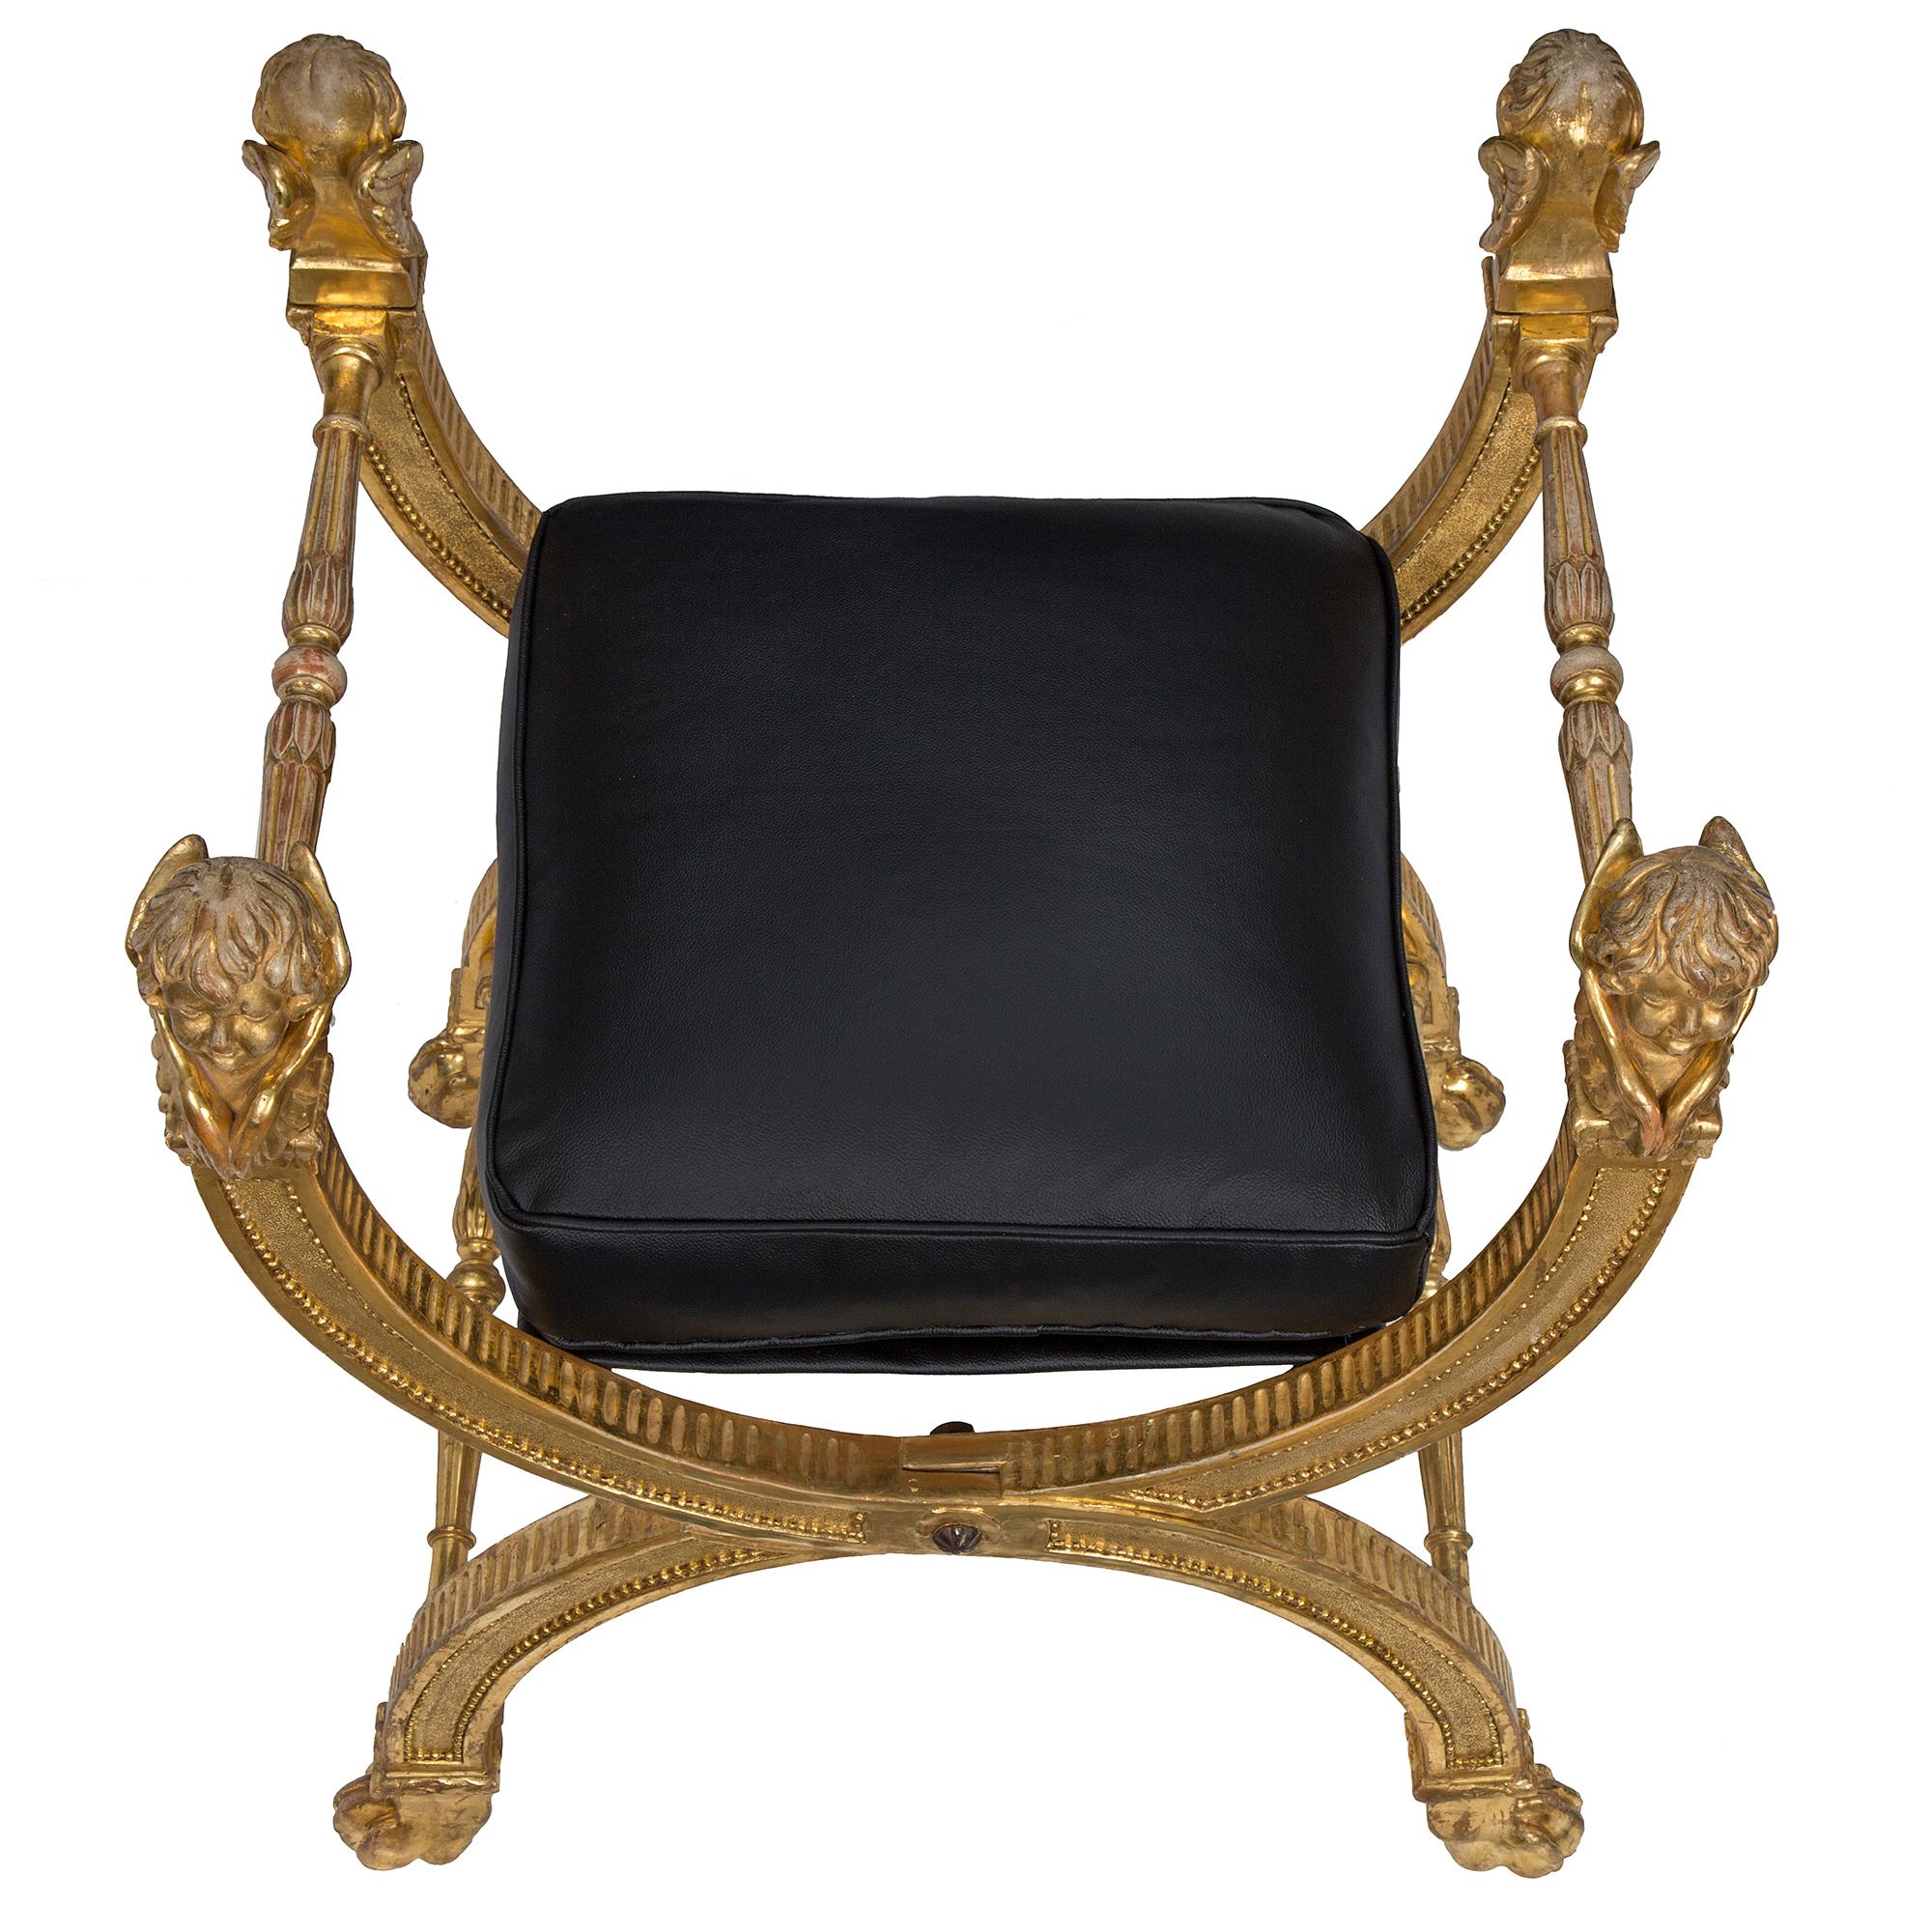 A striking and large scale Italian 18th century Louis XVI period giltwood bench. The bench is raised by handsome paw feet below most attractive X shaped supports. The supports are connected by a carved turned foliate fluted stretcher and display a